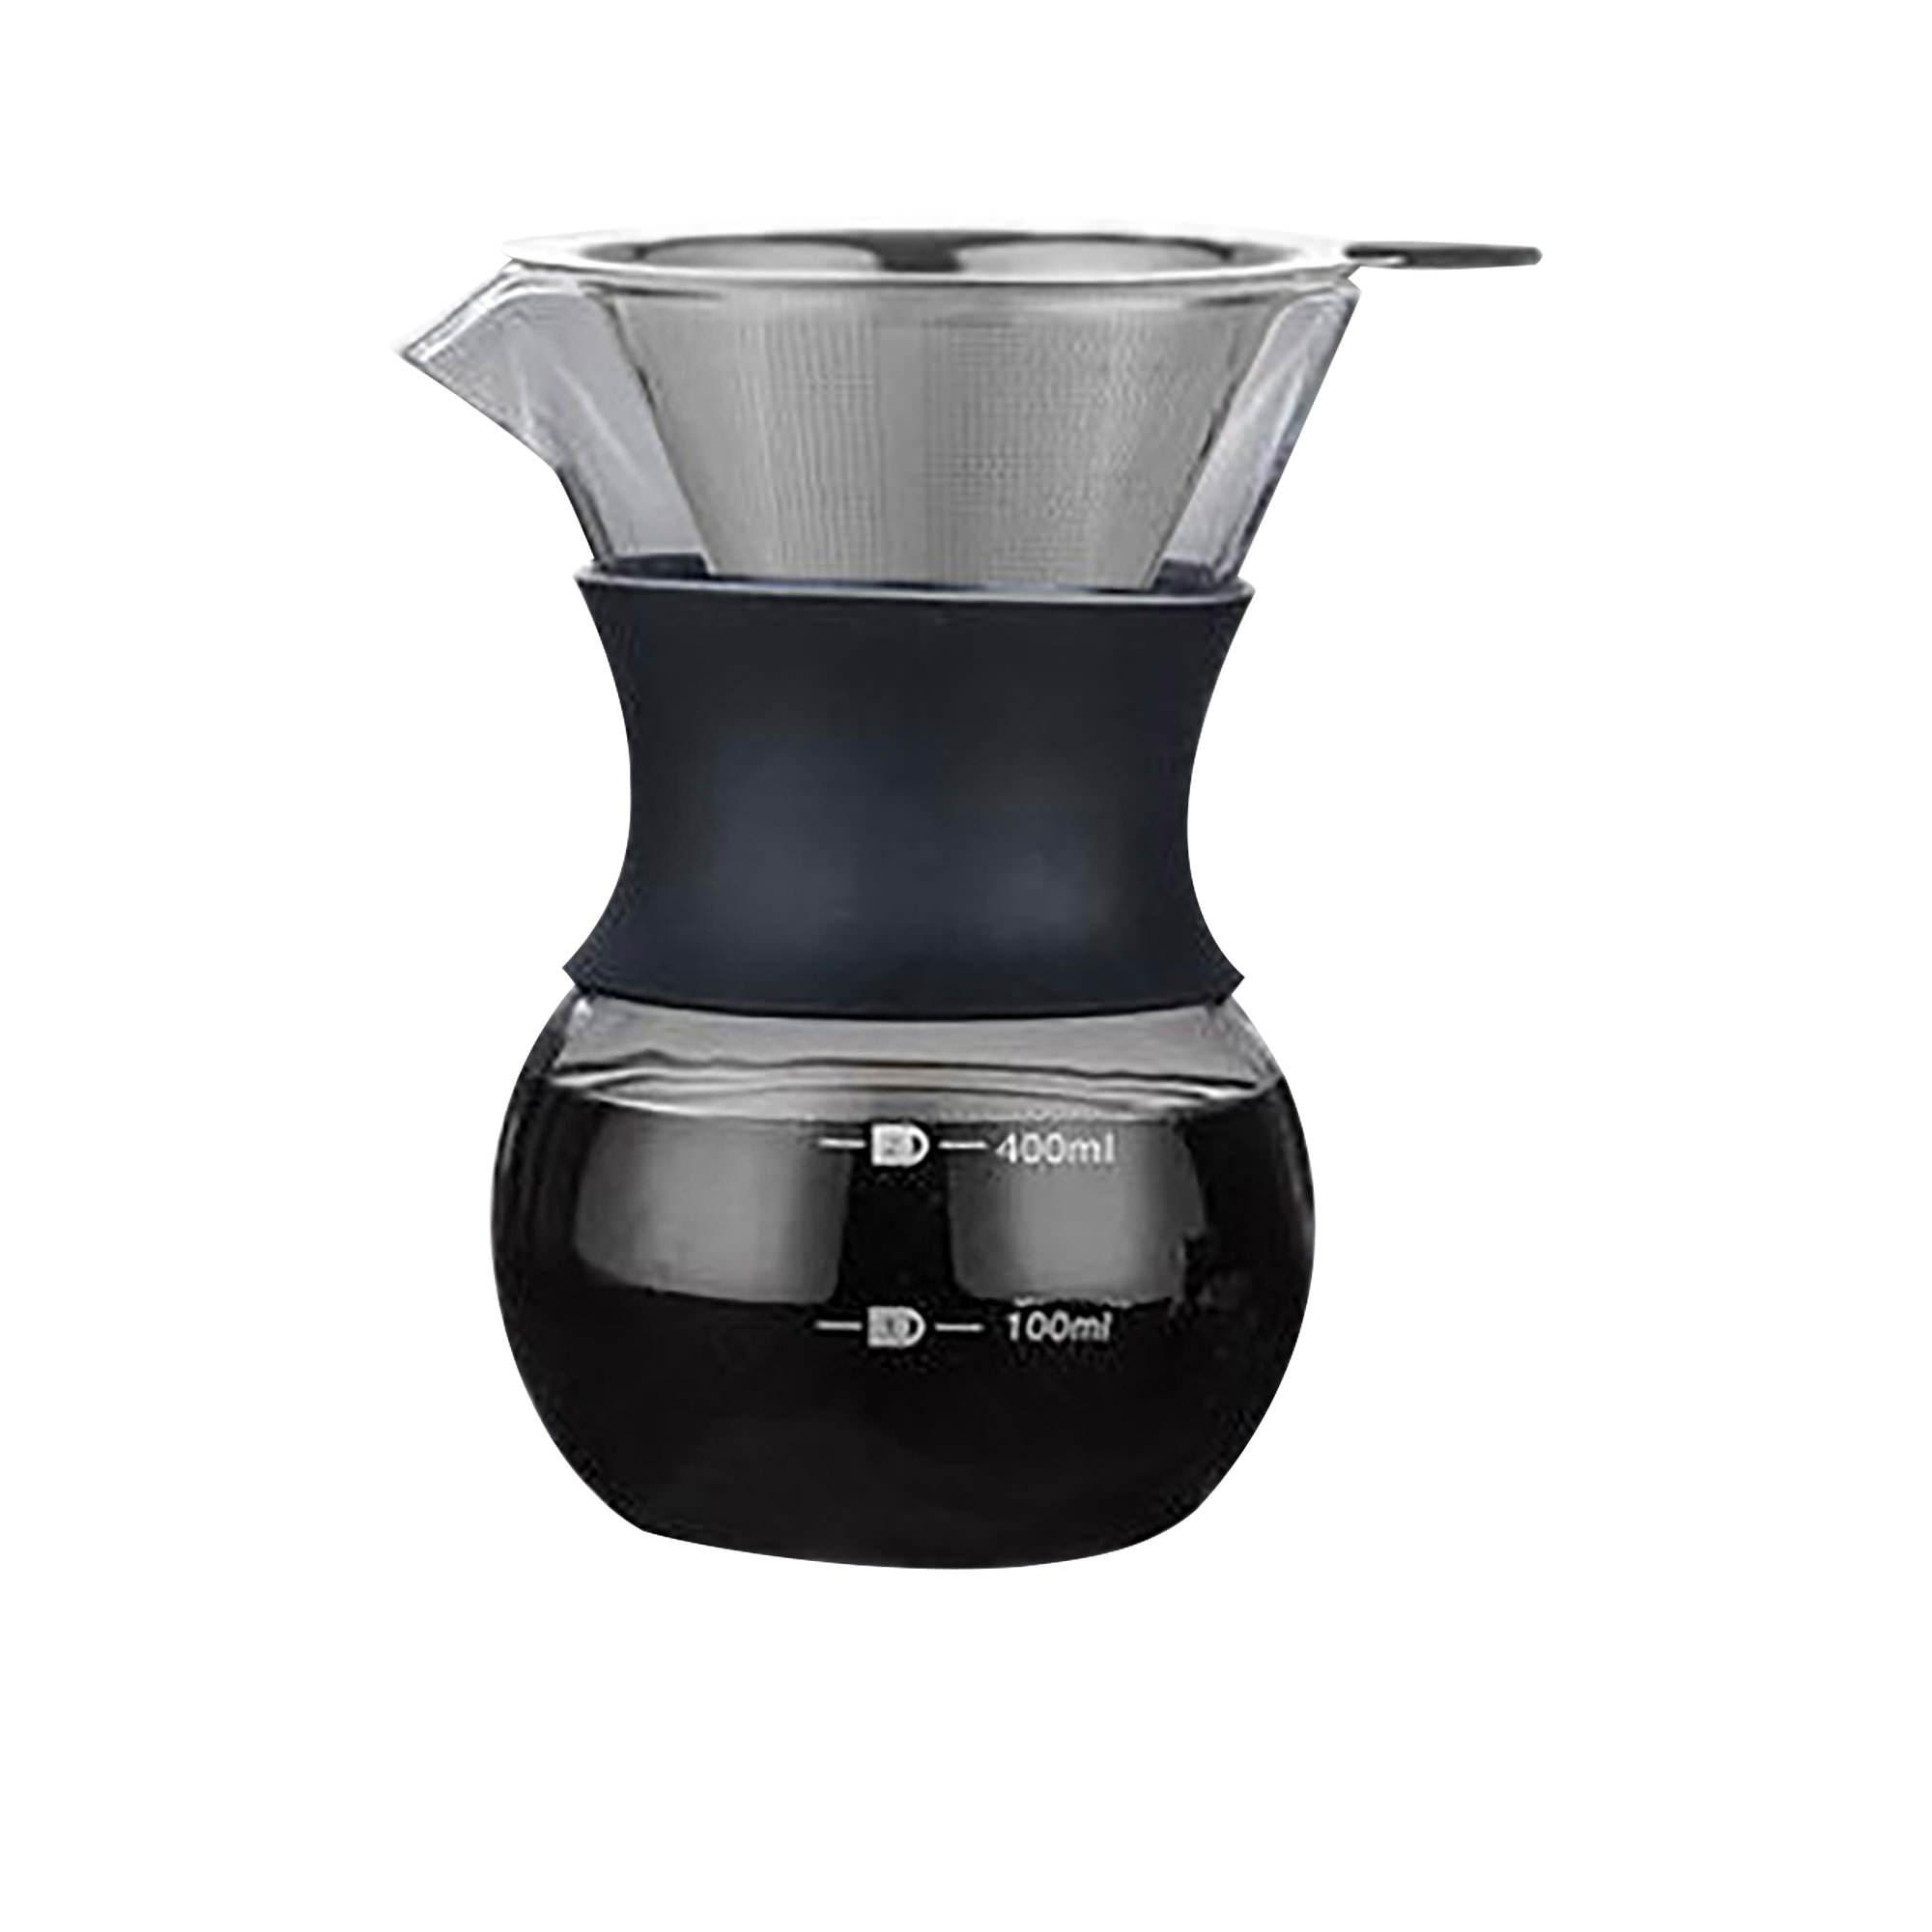 Coffee Culture Pour Over Coffee Maker 400ml Image 6